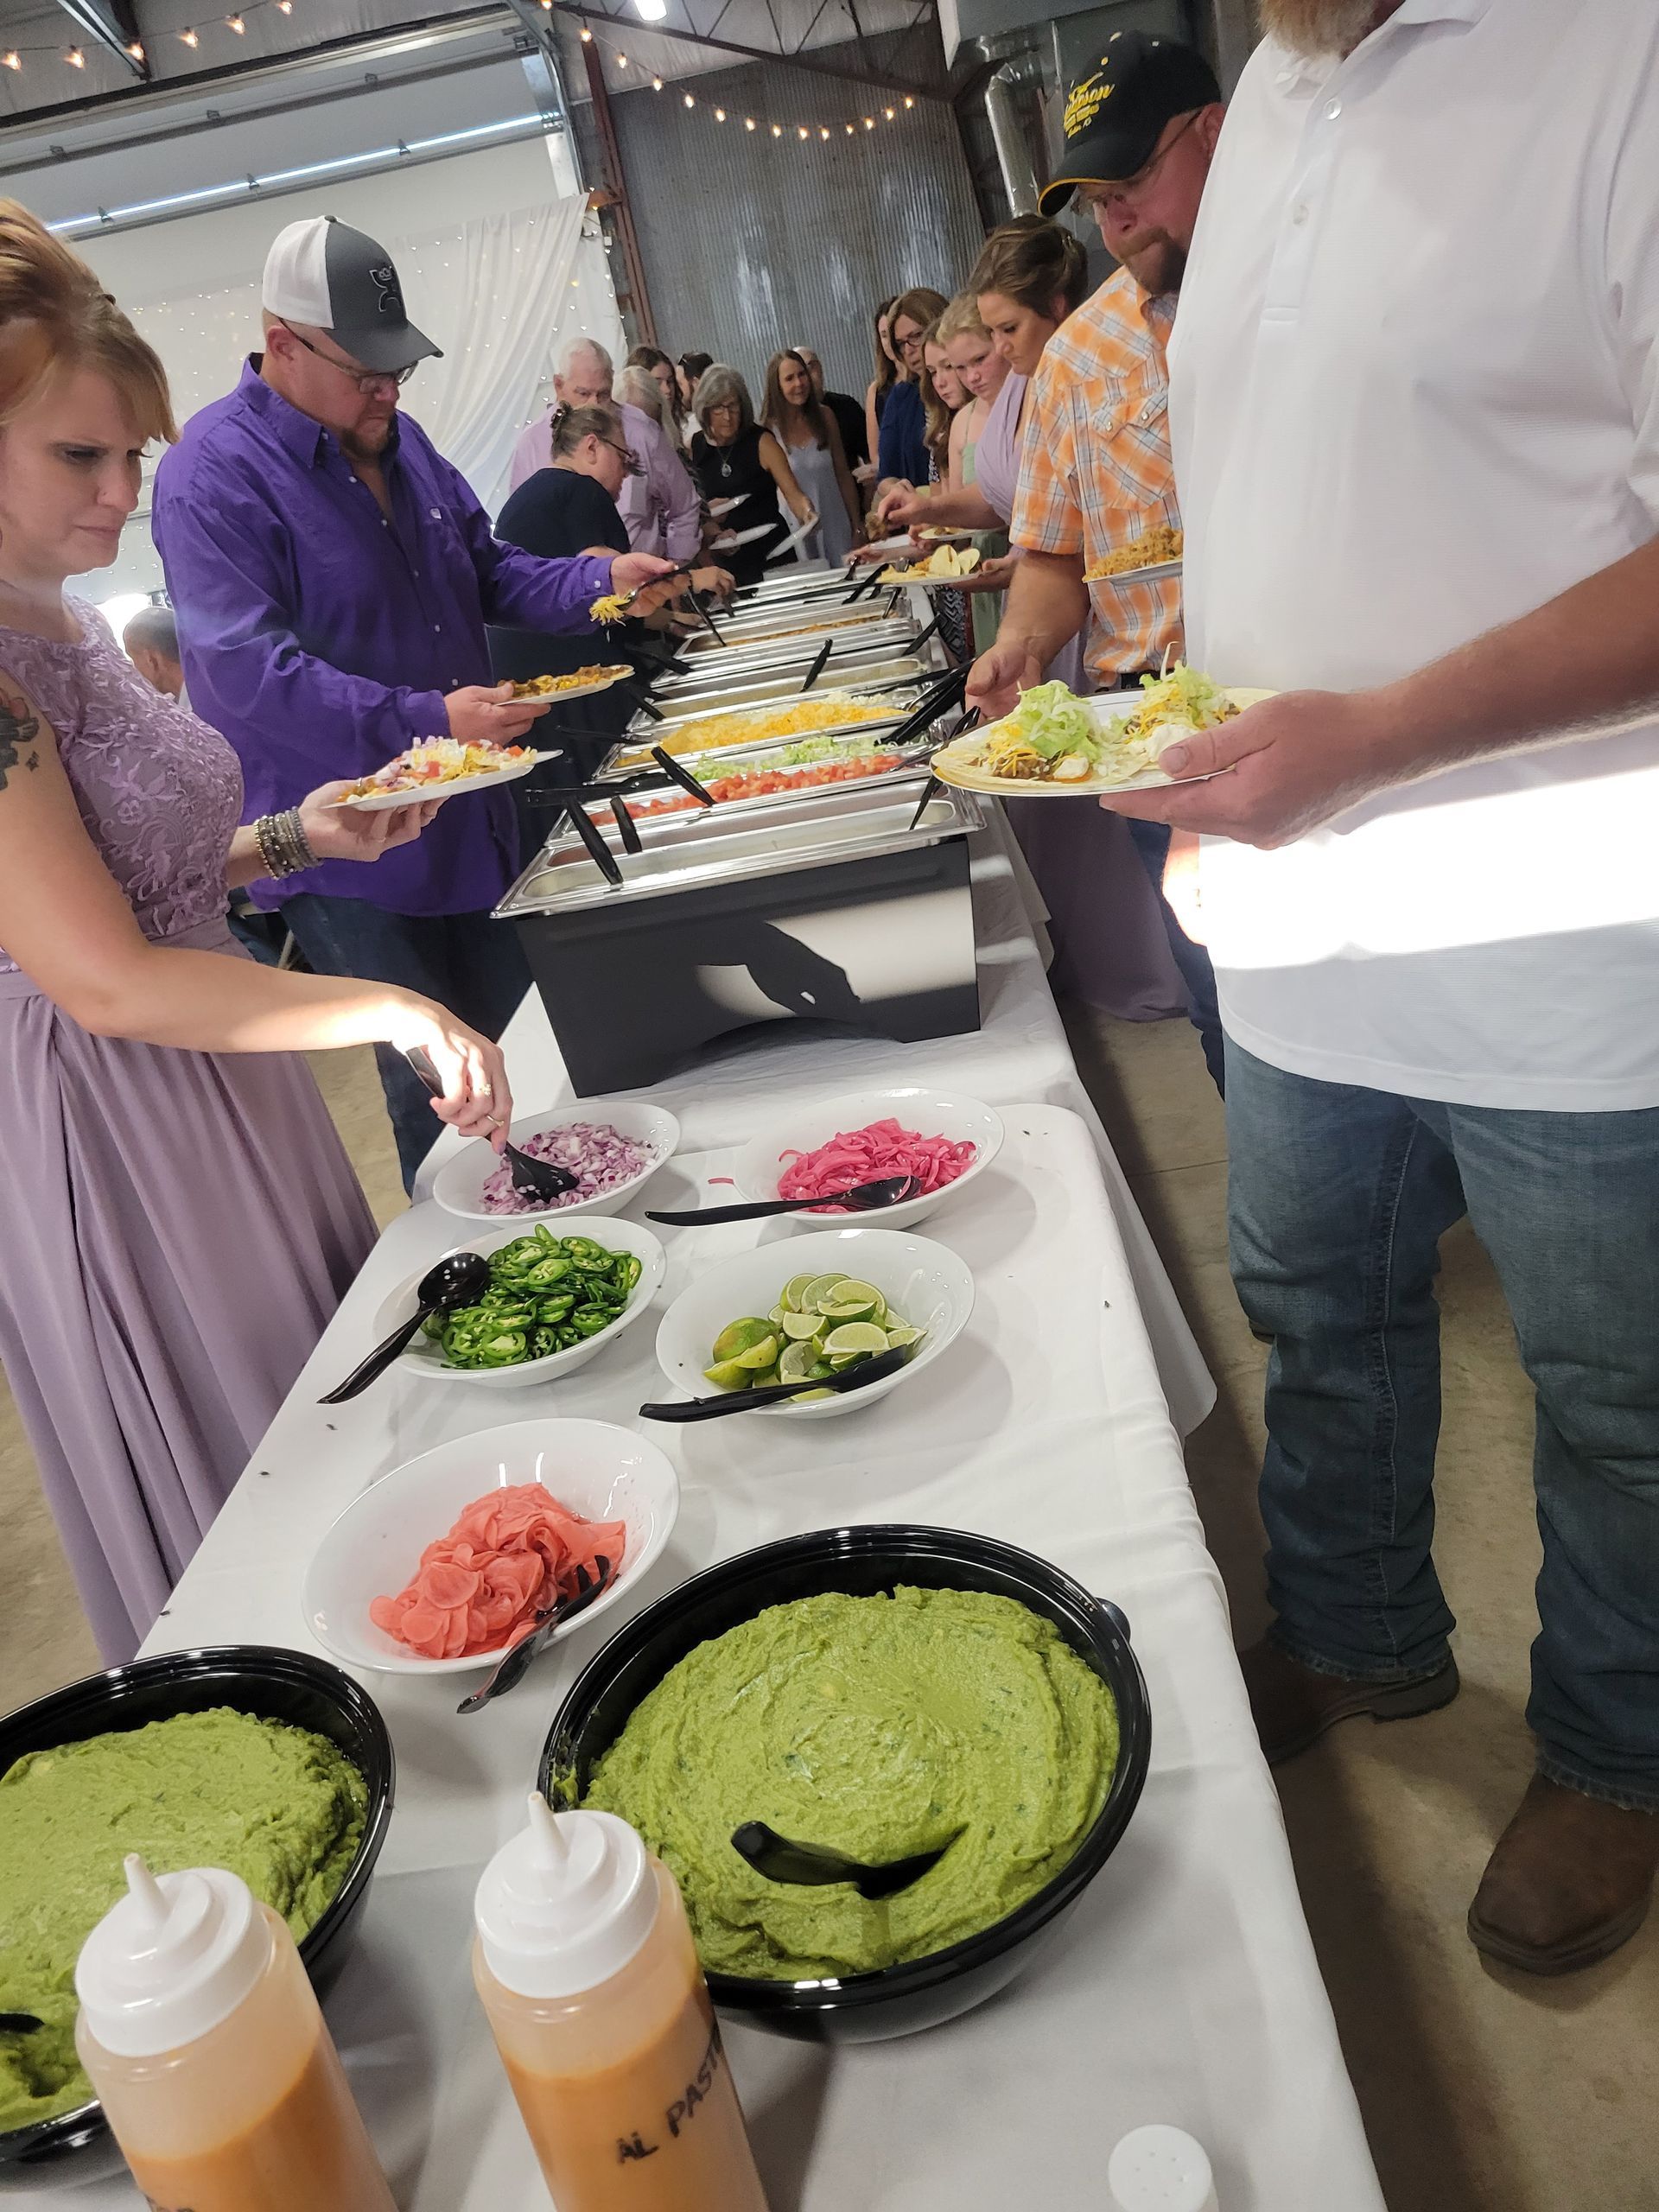 A group of people are standing around a table filled with catered food.